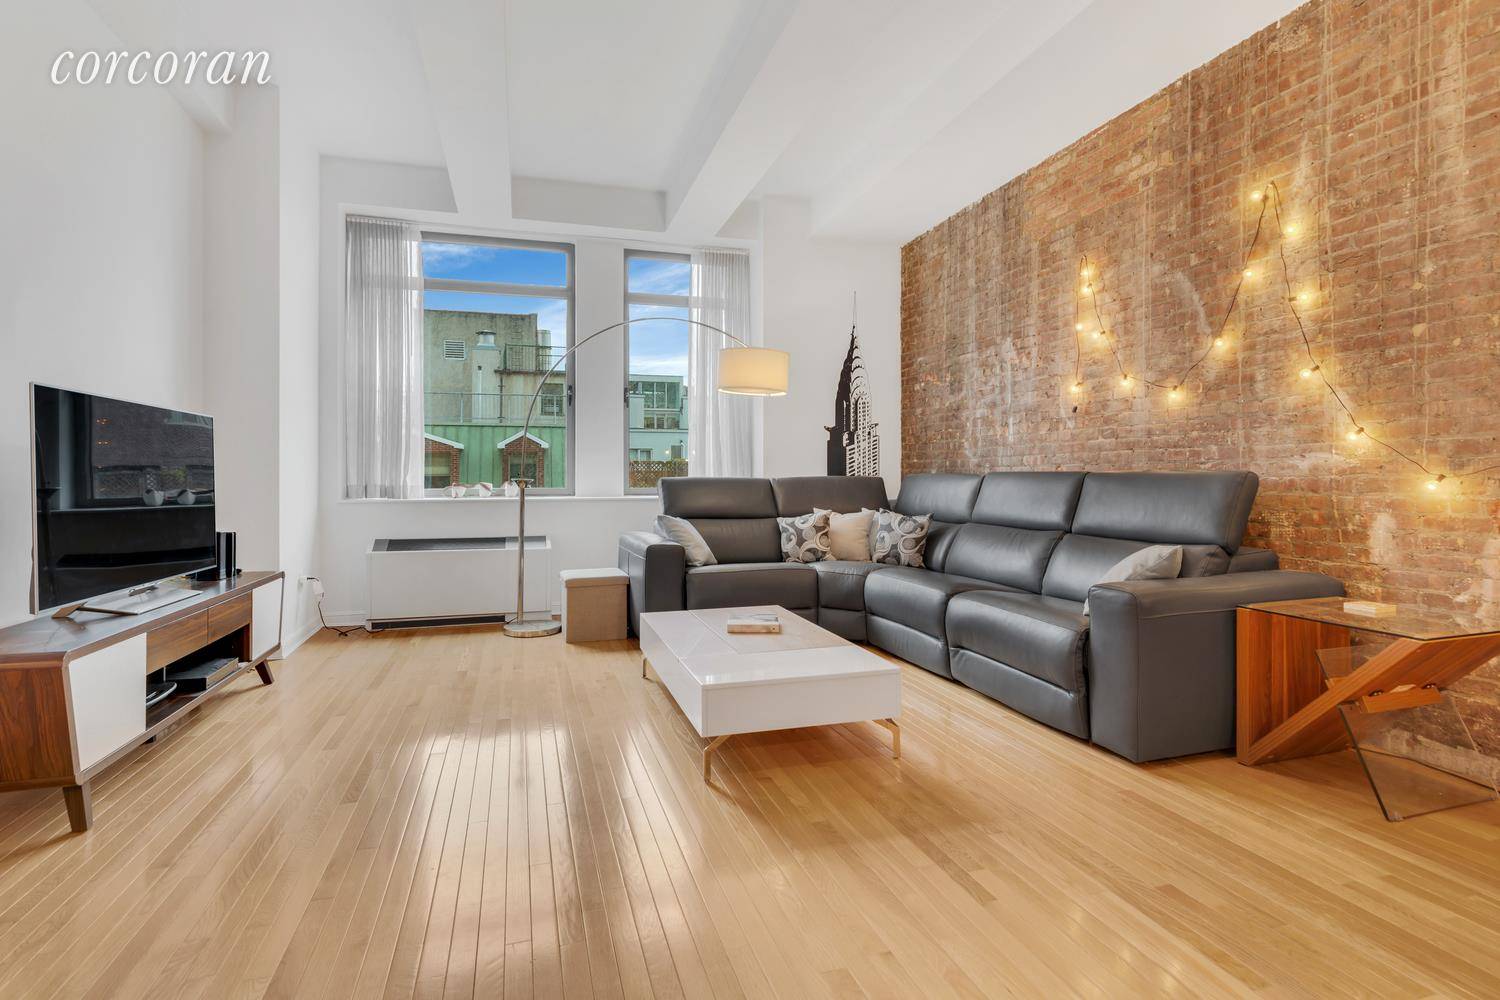 Currently has a pending board application1BR amp ; Home Office Loft with Exposed BrickSunlight and skyline lit evenings make this south facing loft at the Chelsea Mercantile a one of ...